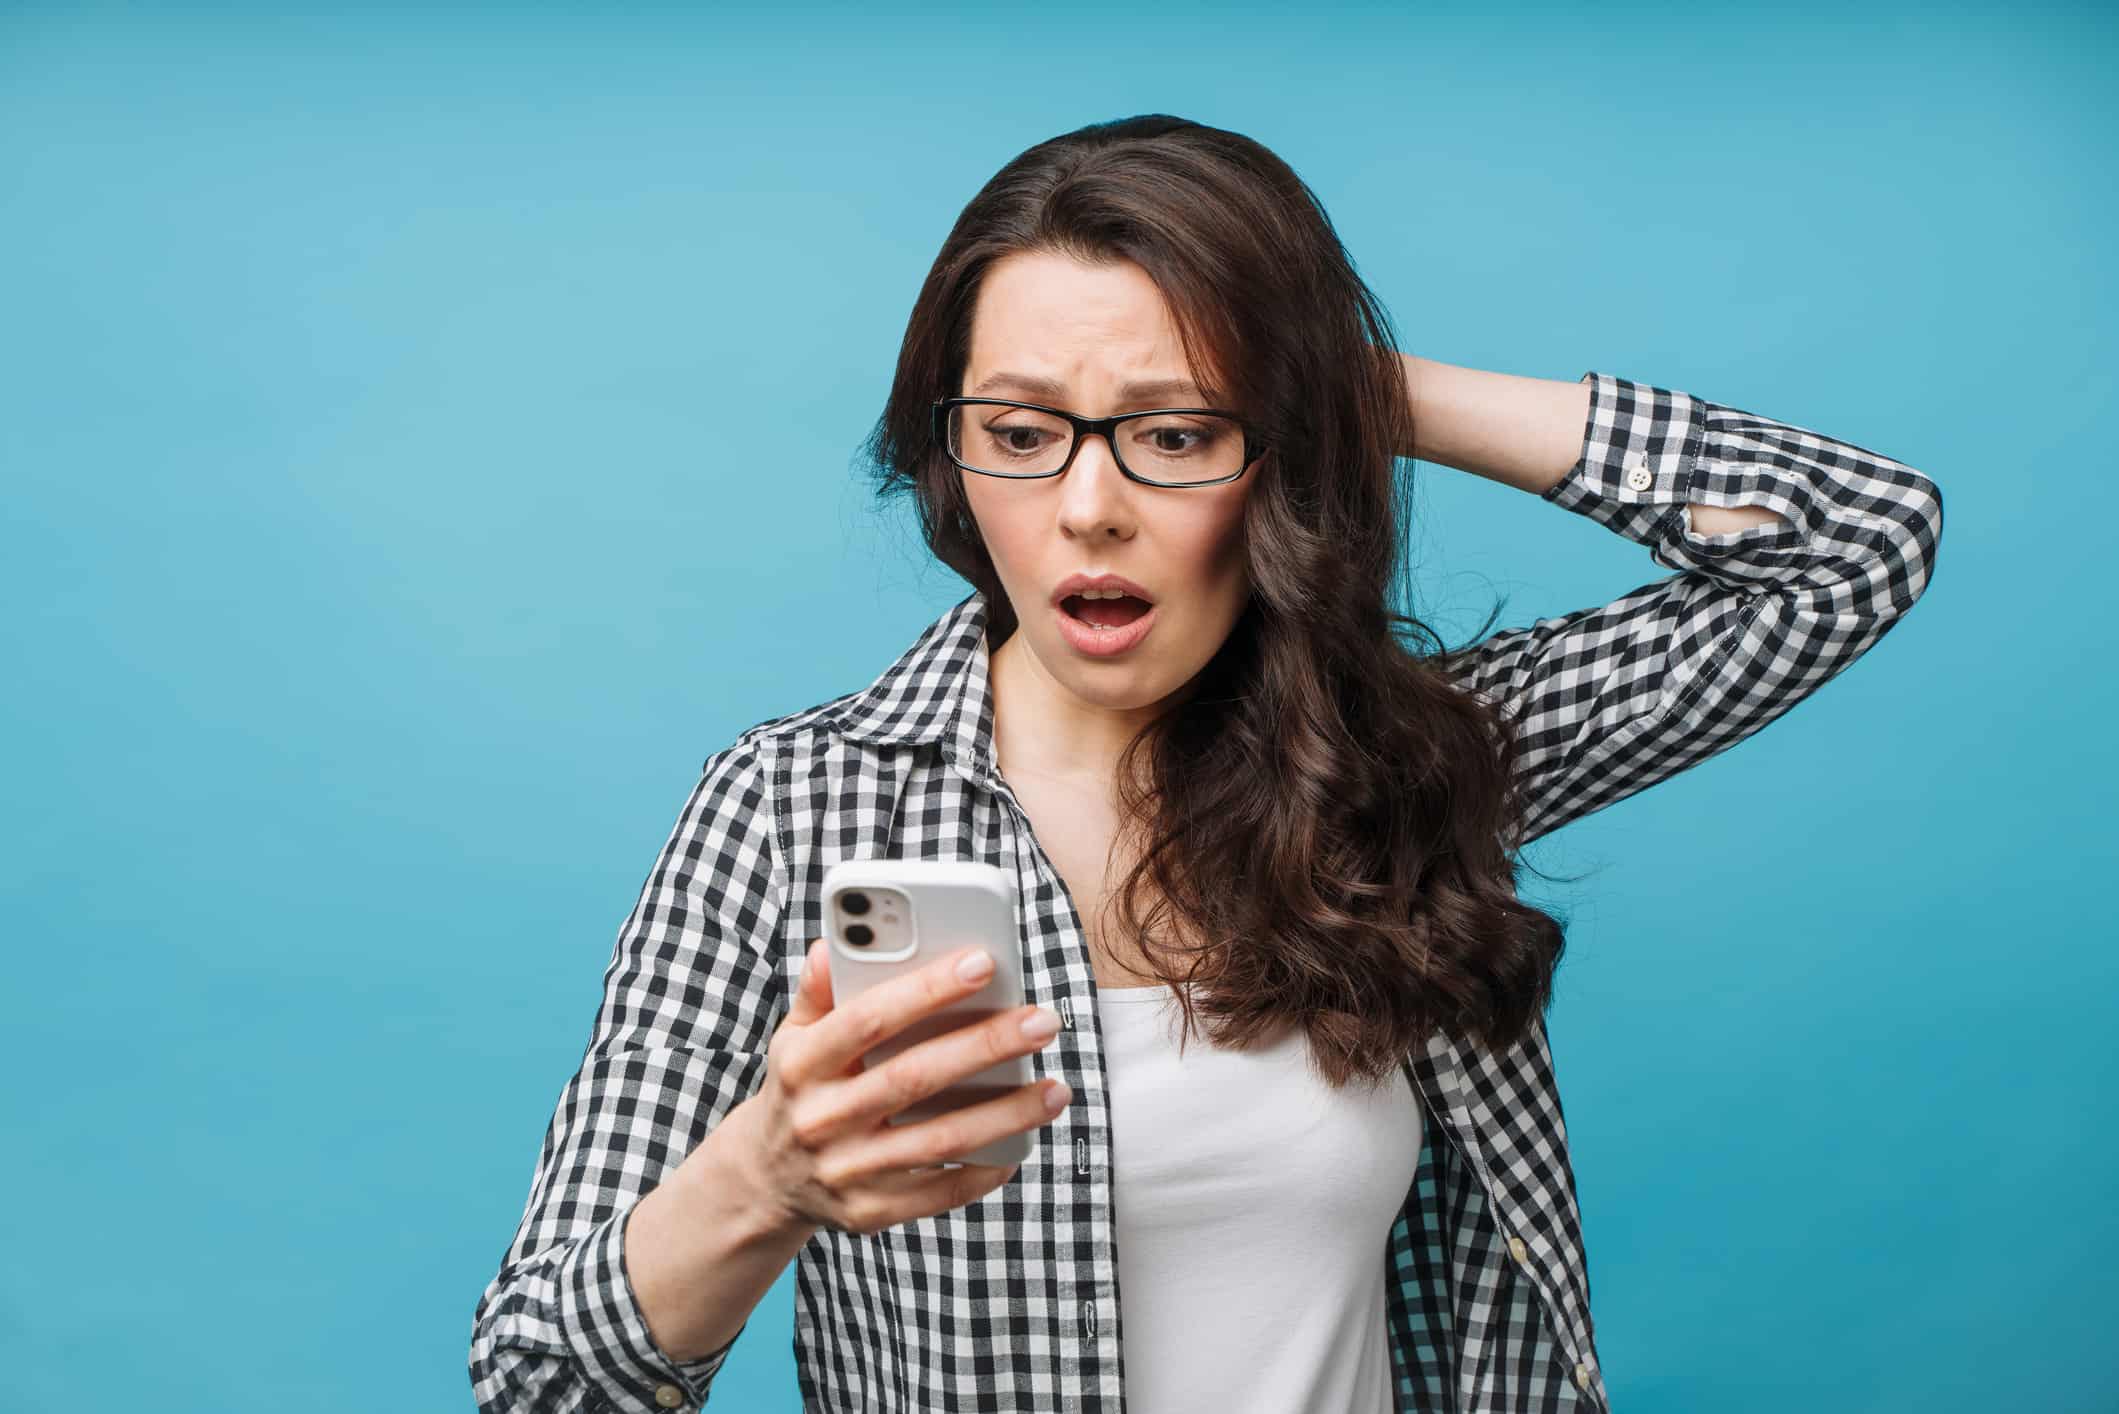 a woman looks distressed as she stares dramatically at her phone whiloe holding her hand to the back of her head with a disbelieving look on her face as though she is experiencing loss or disappointment.